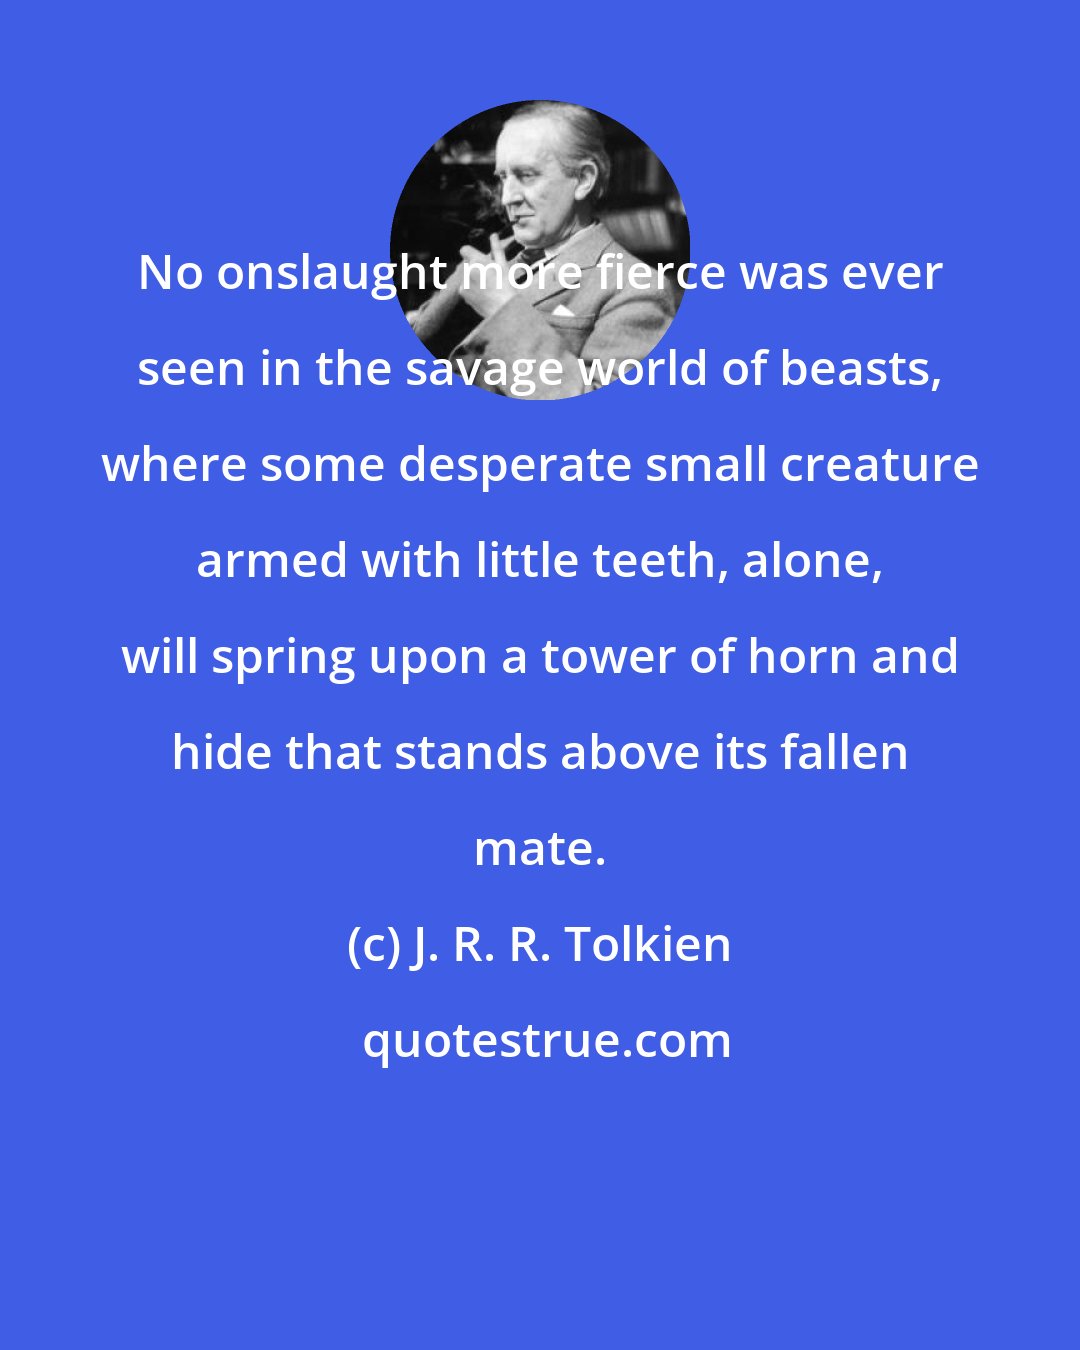 J. R. R. Tolkien: No onslaught more fierce was ever seen in the savage world of beasts, where some desperate small creature armed with little teeth, alone, will spring upon a tower of horn and hide that stands above its fallen mate.